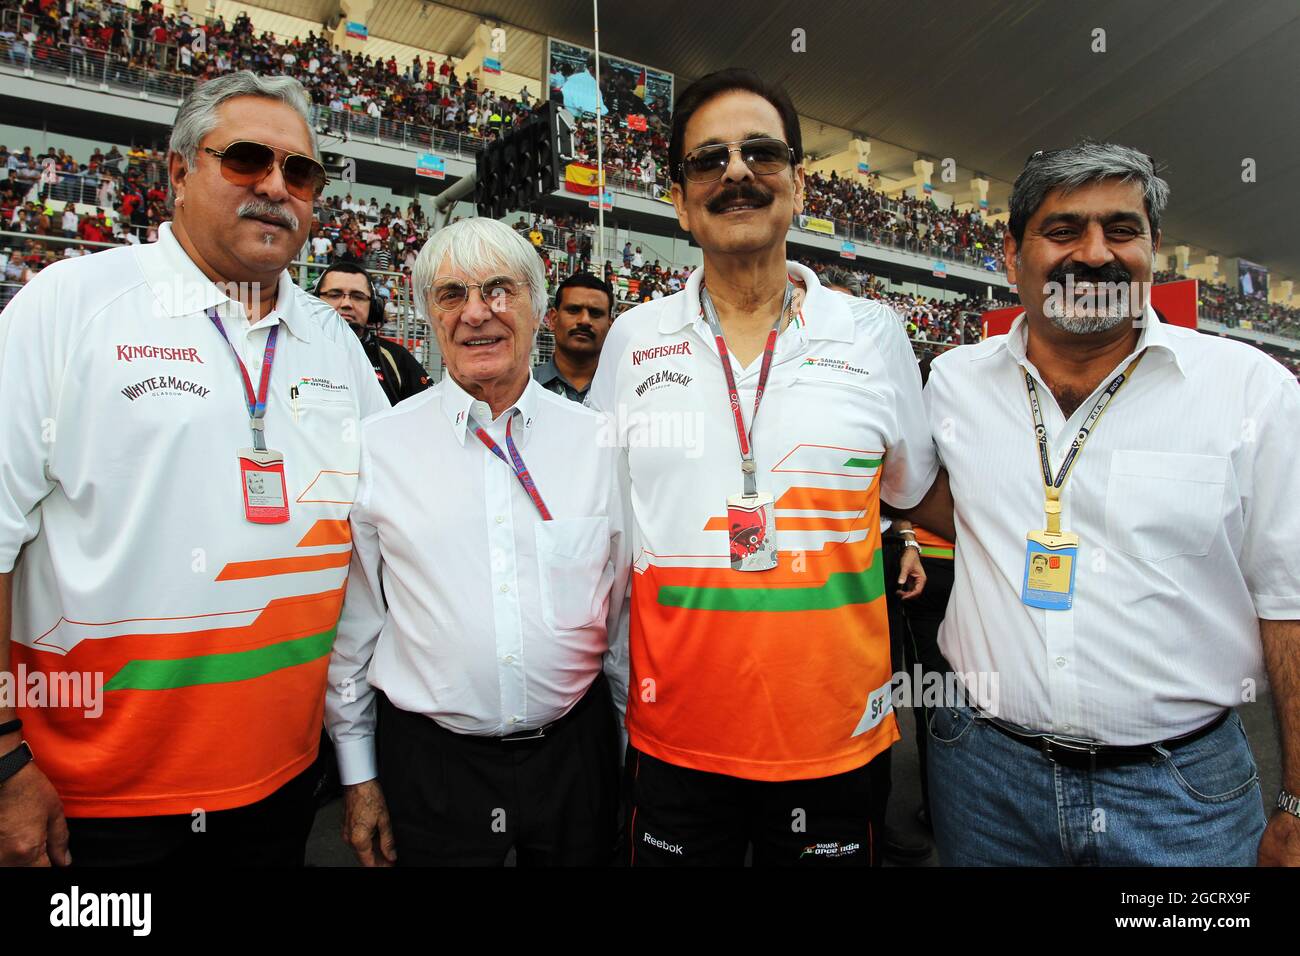 (L to R): Dr. Vijay Mallya (IND) Sahara Force India F1 Team Owner on the grid with Bernie Ecclestone (GBR) CEO Formula One Group (FOM), Subrata Roy Sahara (IND) Sahara Chairman and Vicky Chandhok (IND). Indian Grand Prix, Sunday 28th October 2012. Greater Noida, New Delhi, India. Stock Photo